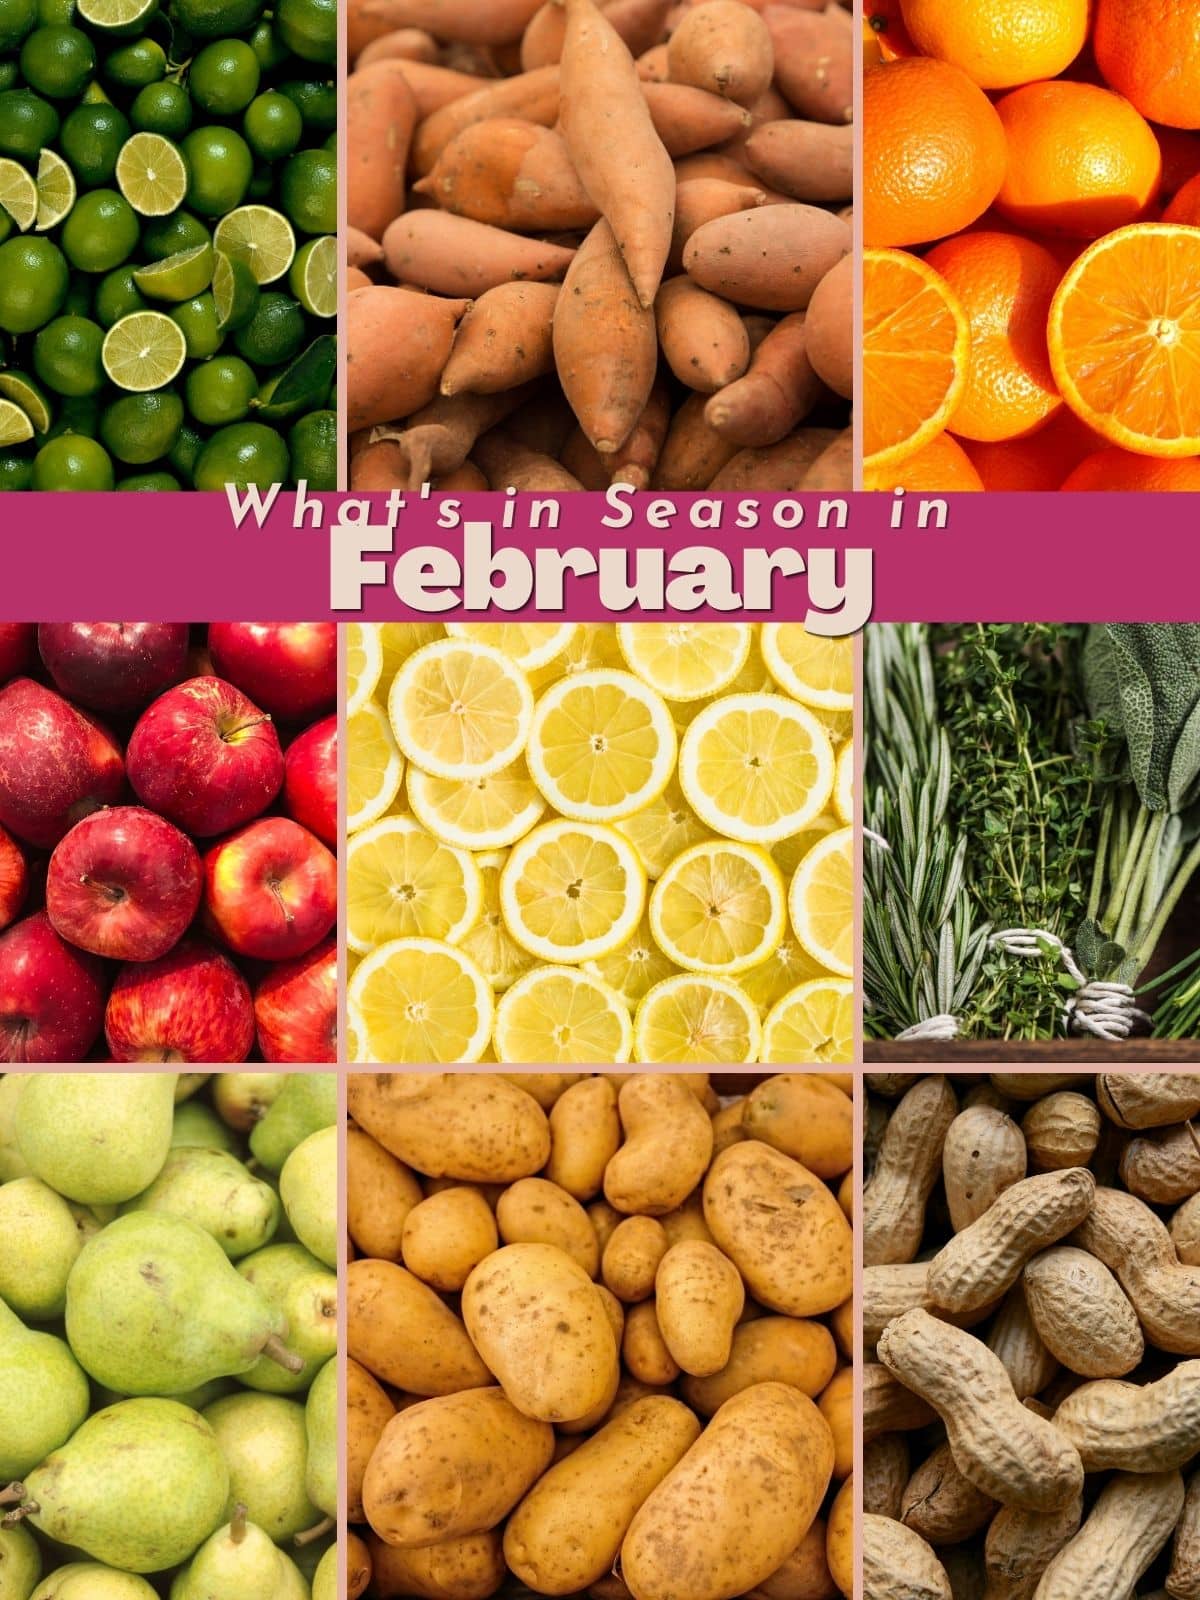 graph of produce that is in season in february